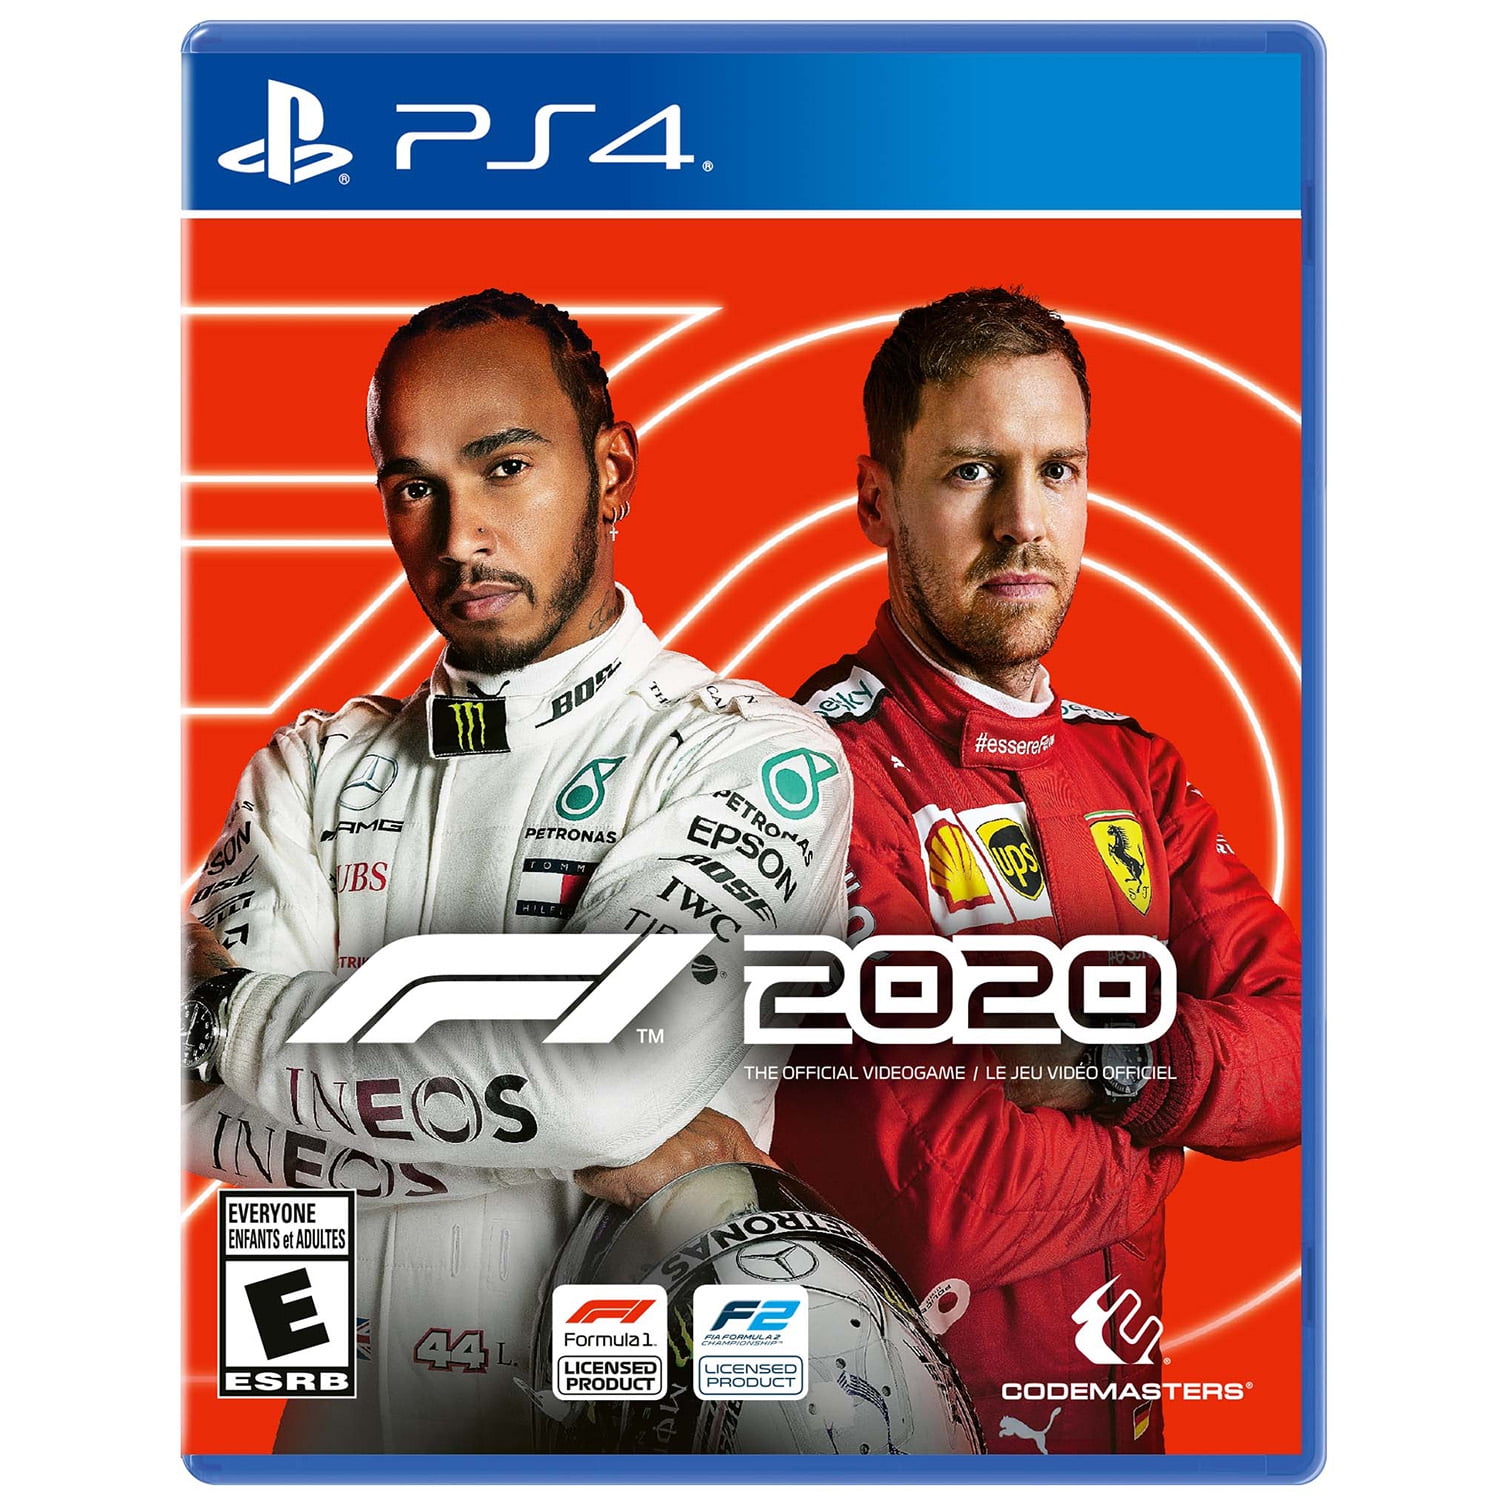 F1 2020, Codemasters, PlayStation 4, 816819017722, New and Sealed